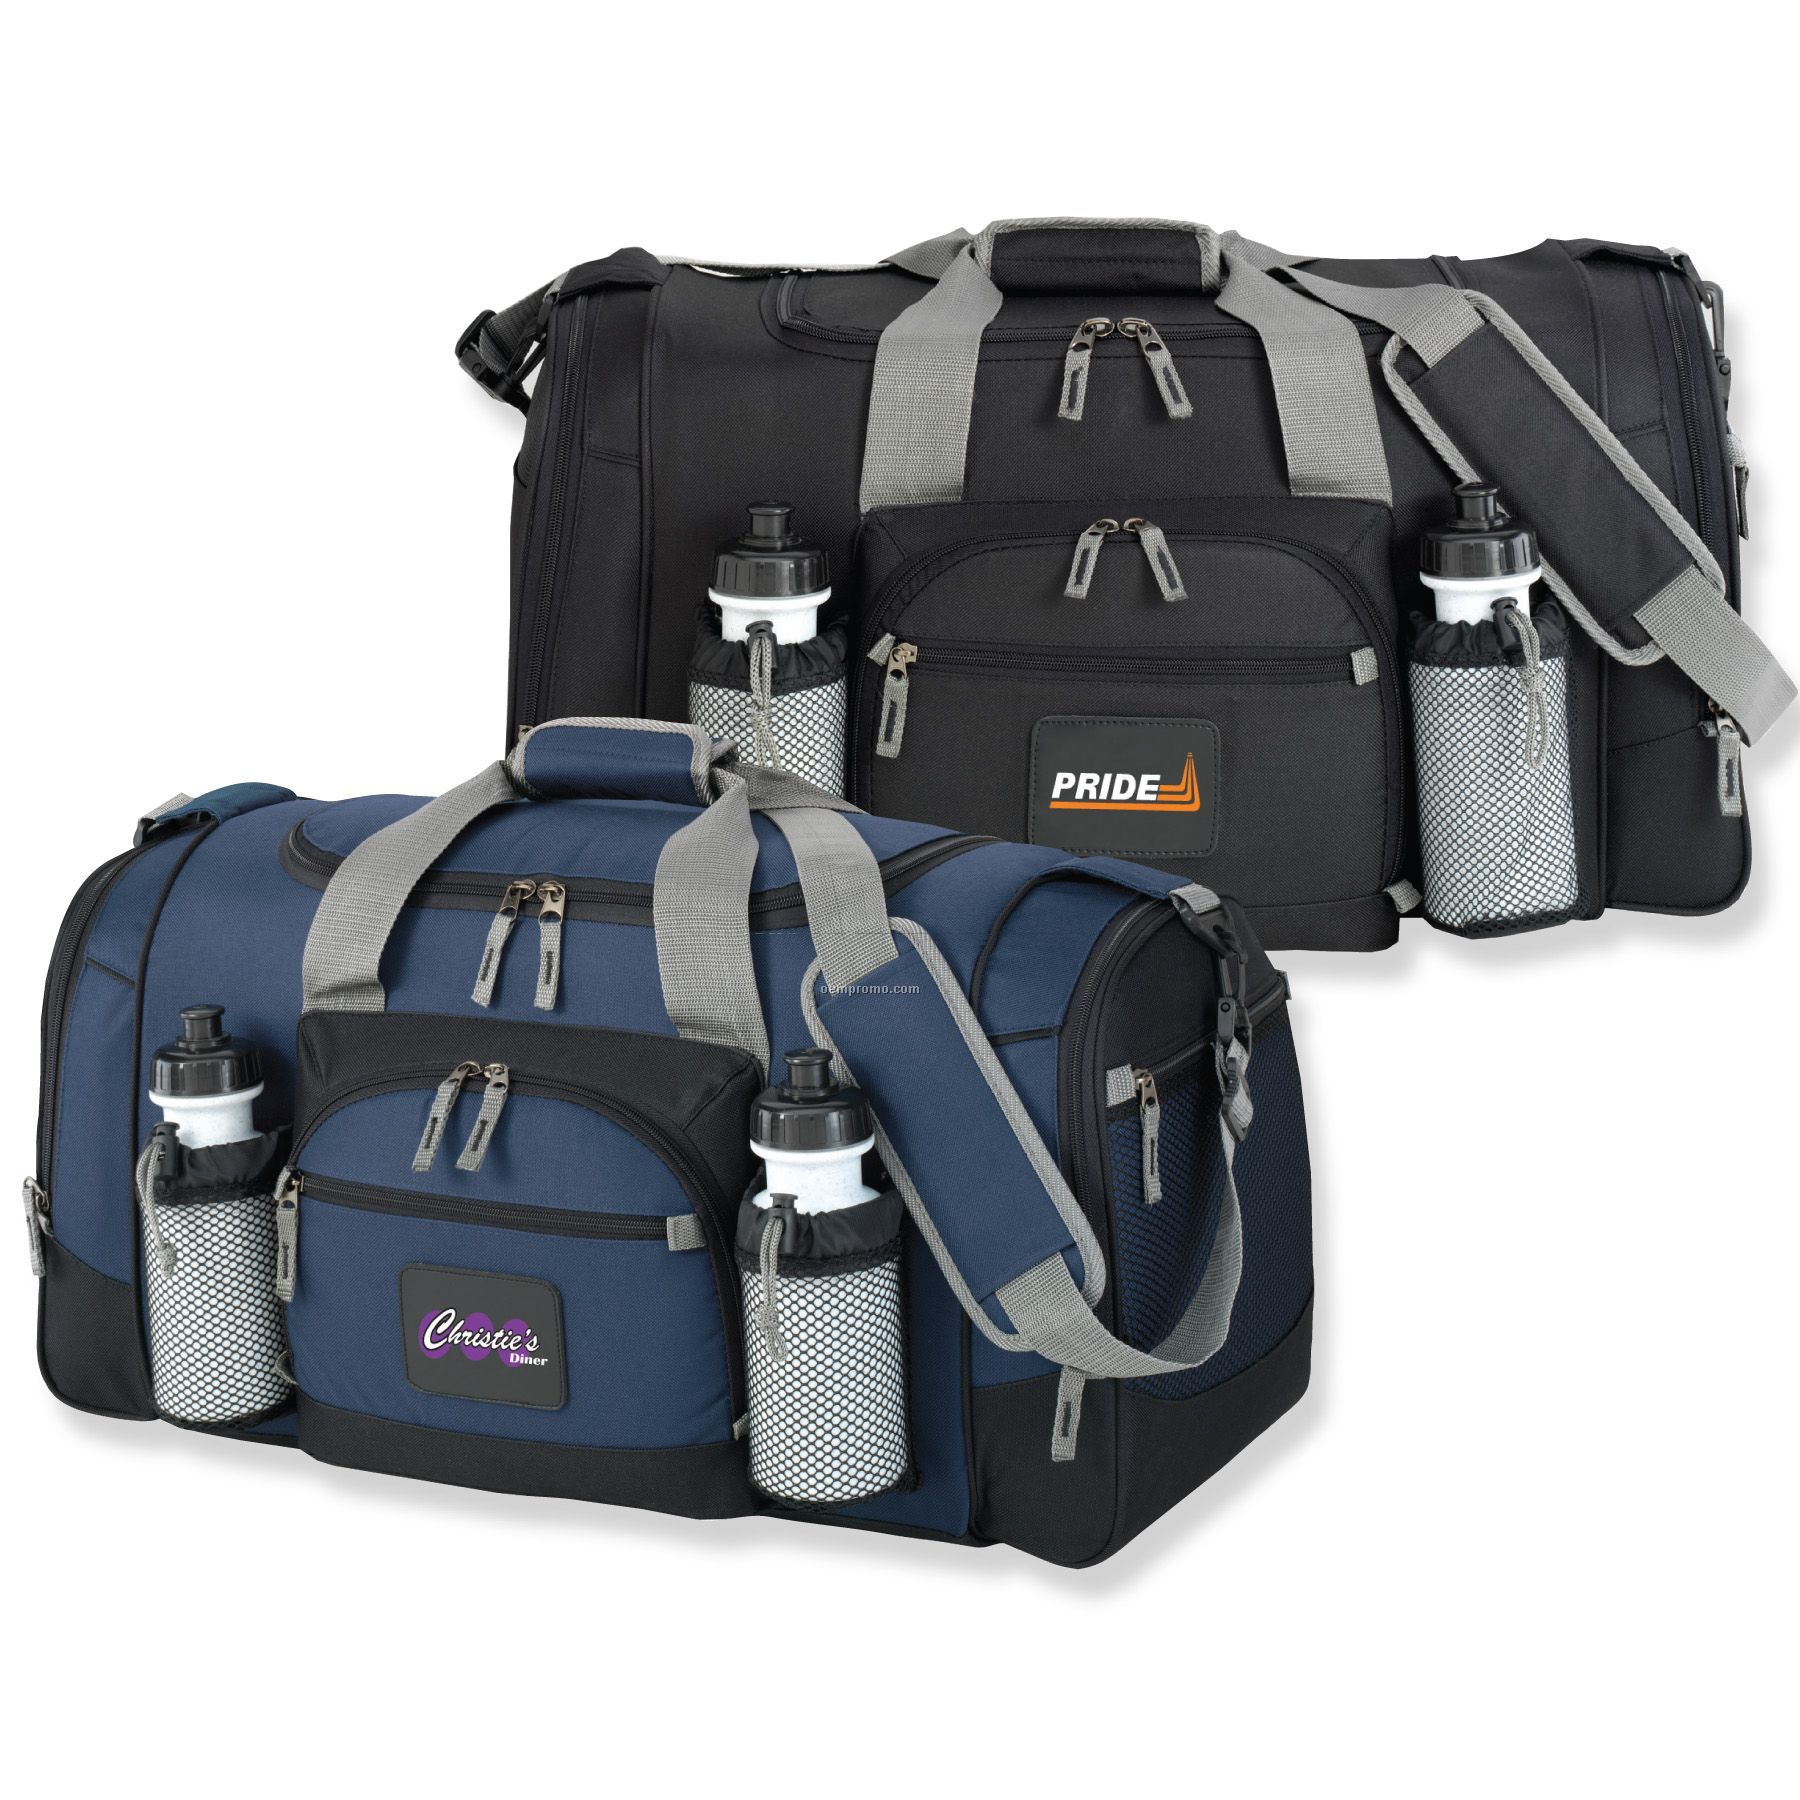 Expedition Duffel Bag